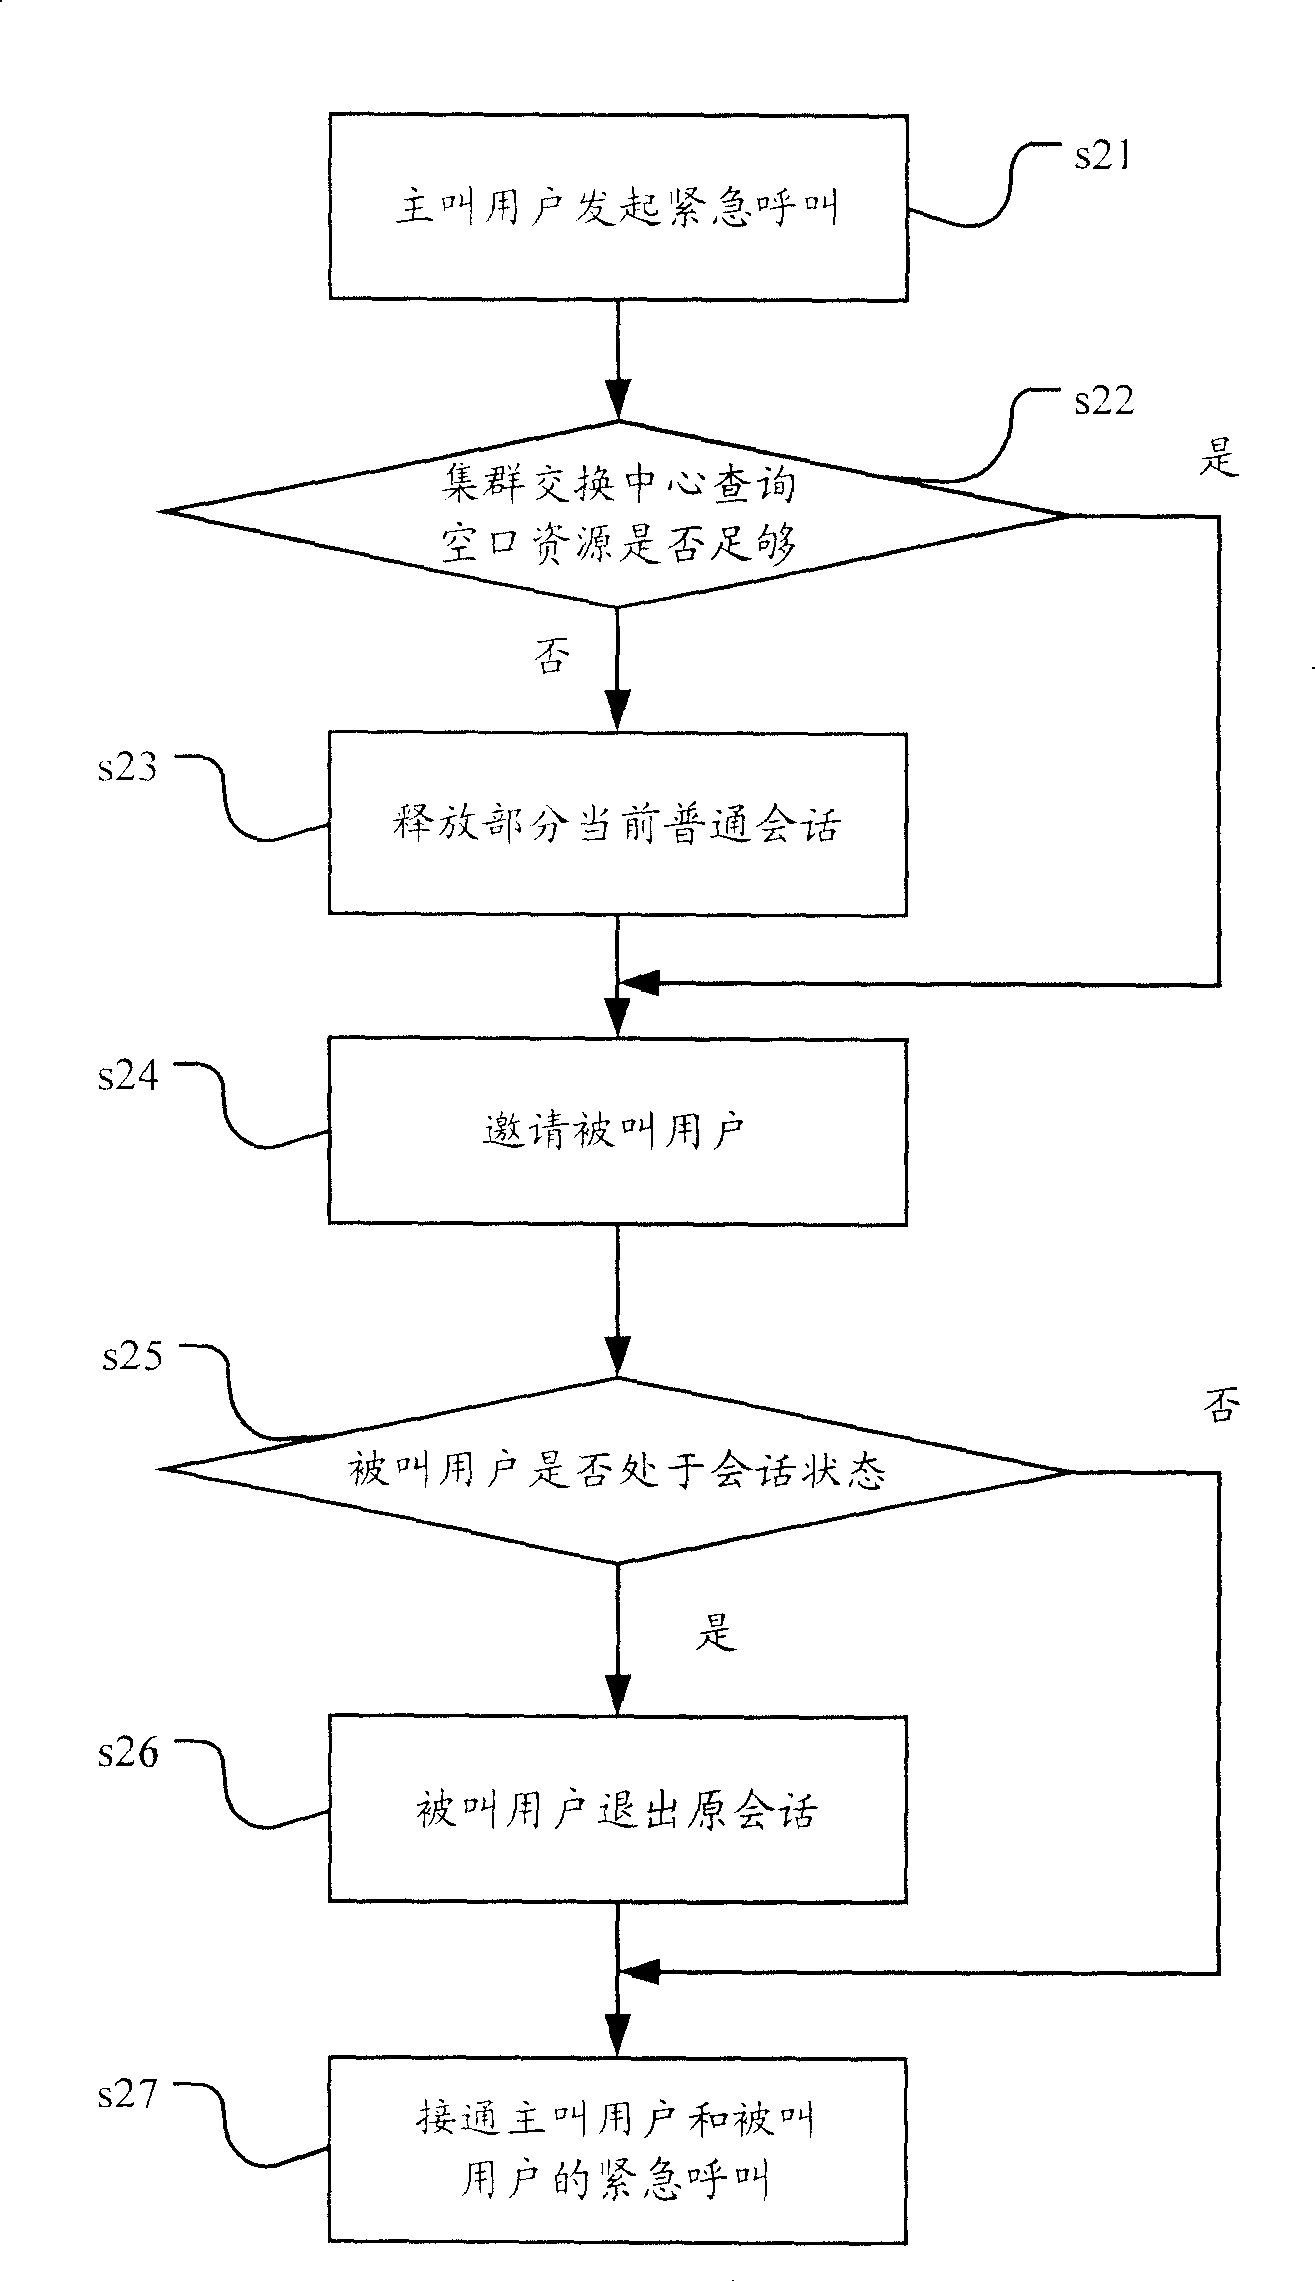 Call method and system for trunked communication